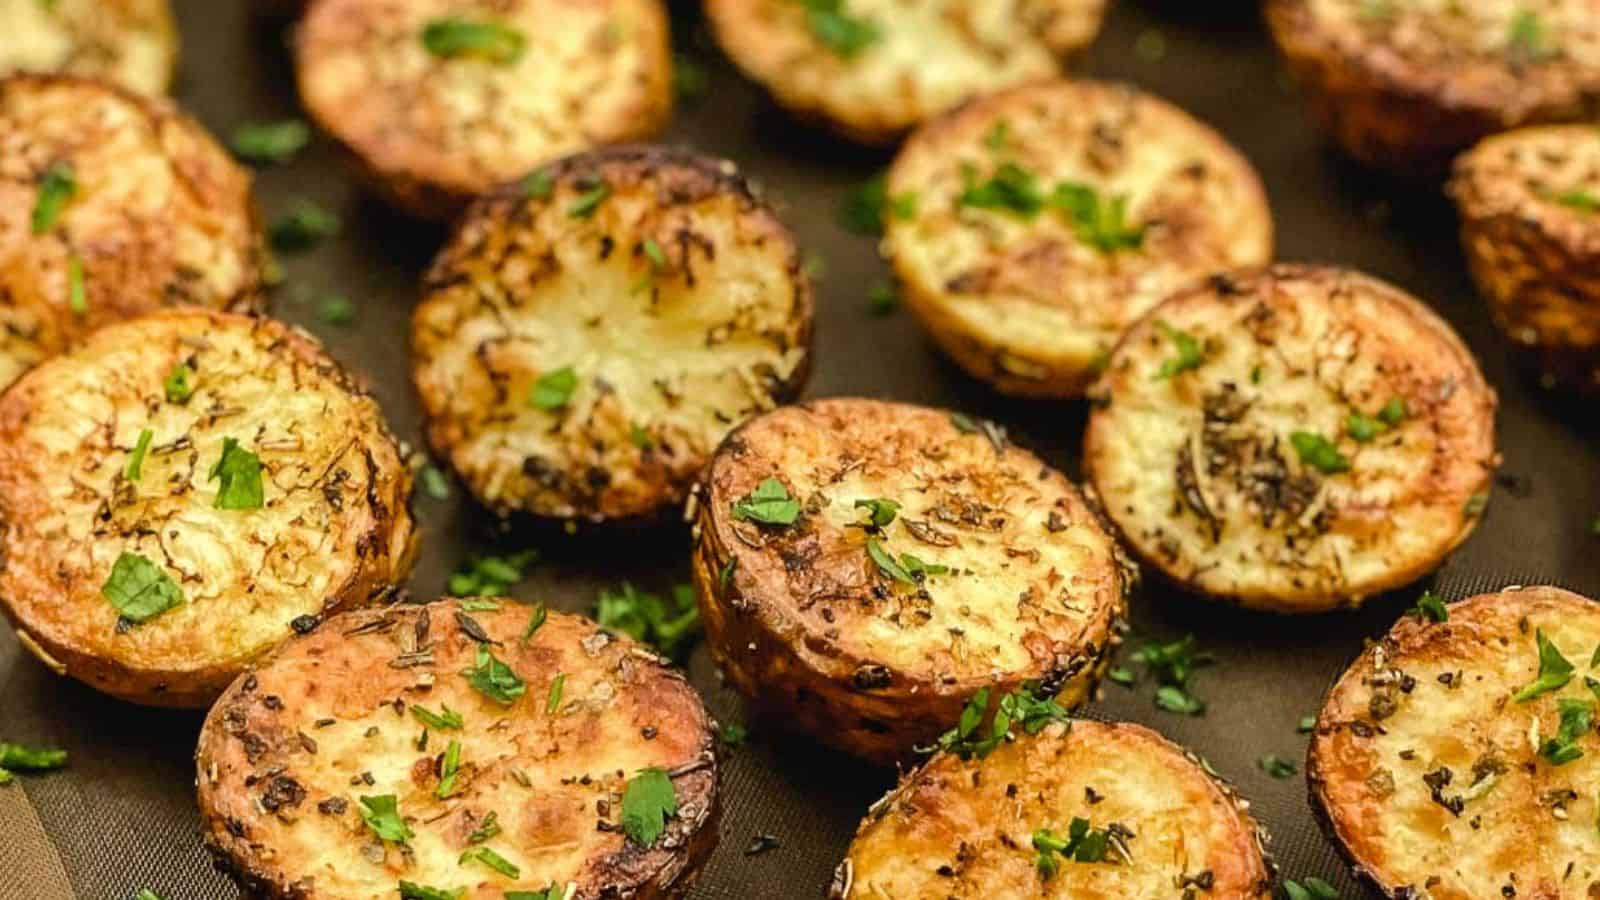 <p>Baby potatoes from the air fryer are a versatile and pocket-friendly side. They go with almost anything. Quick, tasty, and sure to be a hit at the dinner table.<br><strong>Get the Recipe: </strong><a href="https://www.splashoftaste.com/air-fryer-baby-potatoes/?utm_source=msn&utm_medium=page&utm_campaign=msn">Air Fryer Baby Potatoes</a></p>